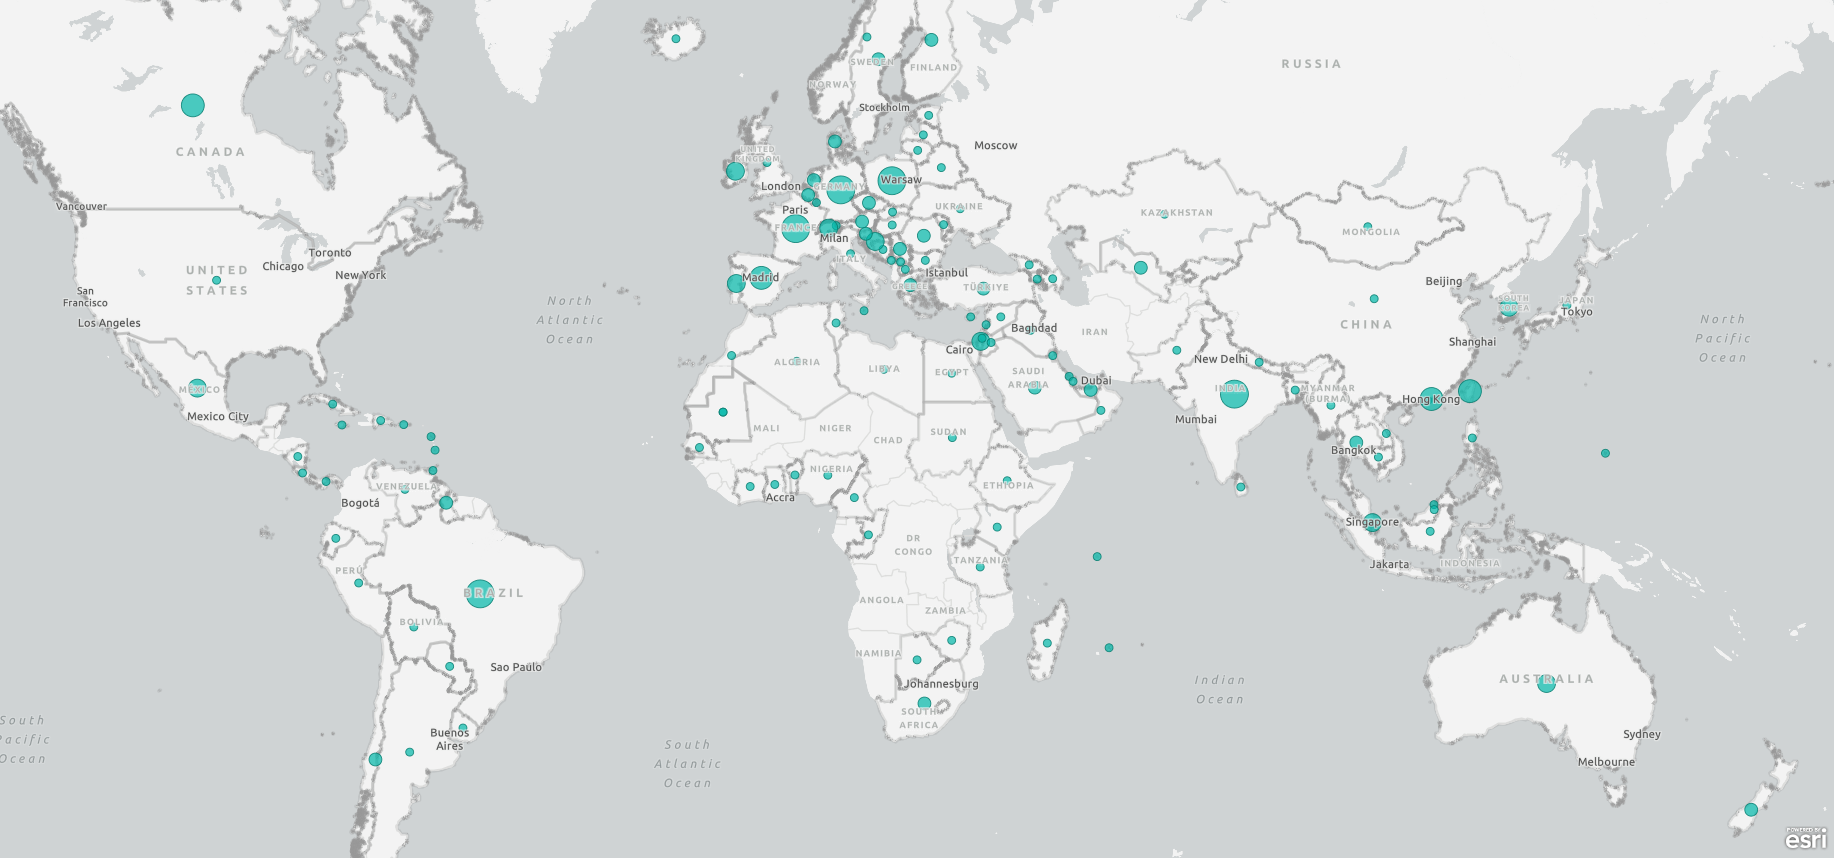 world map of CSD users 2022